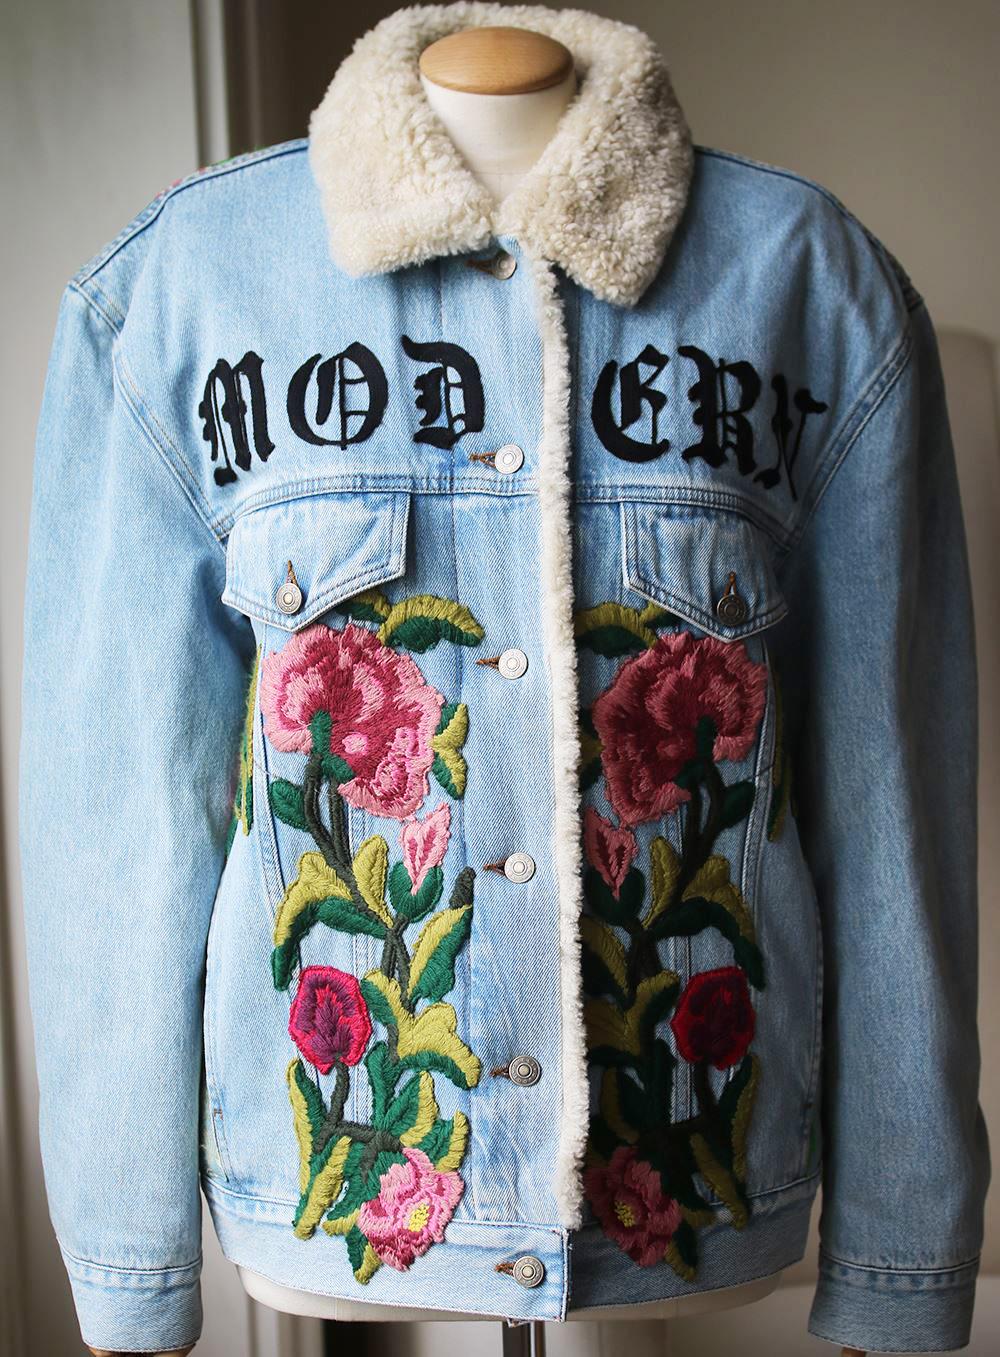 Gucci's oversized shearling-lined denim jacket has a cool, customized look.
The jacquard panel at the back is intricately embroidered by hand with florals and a flaming mythical creature - each piece takes an artisan hours to complete. 
Light-blue